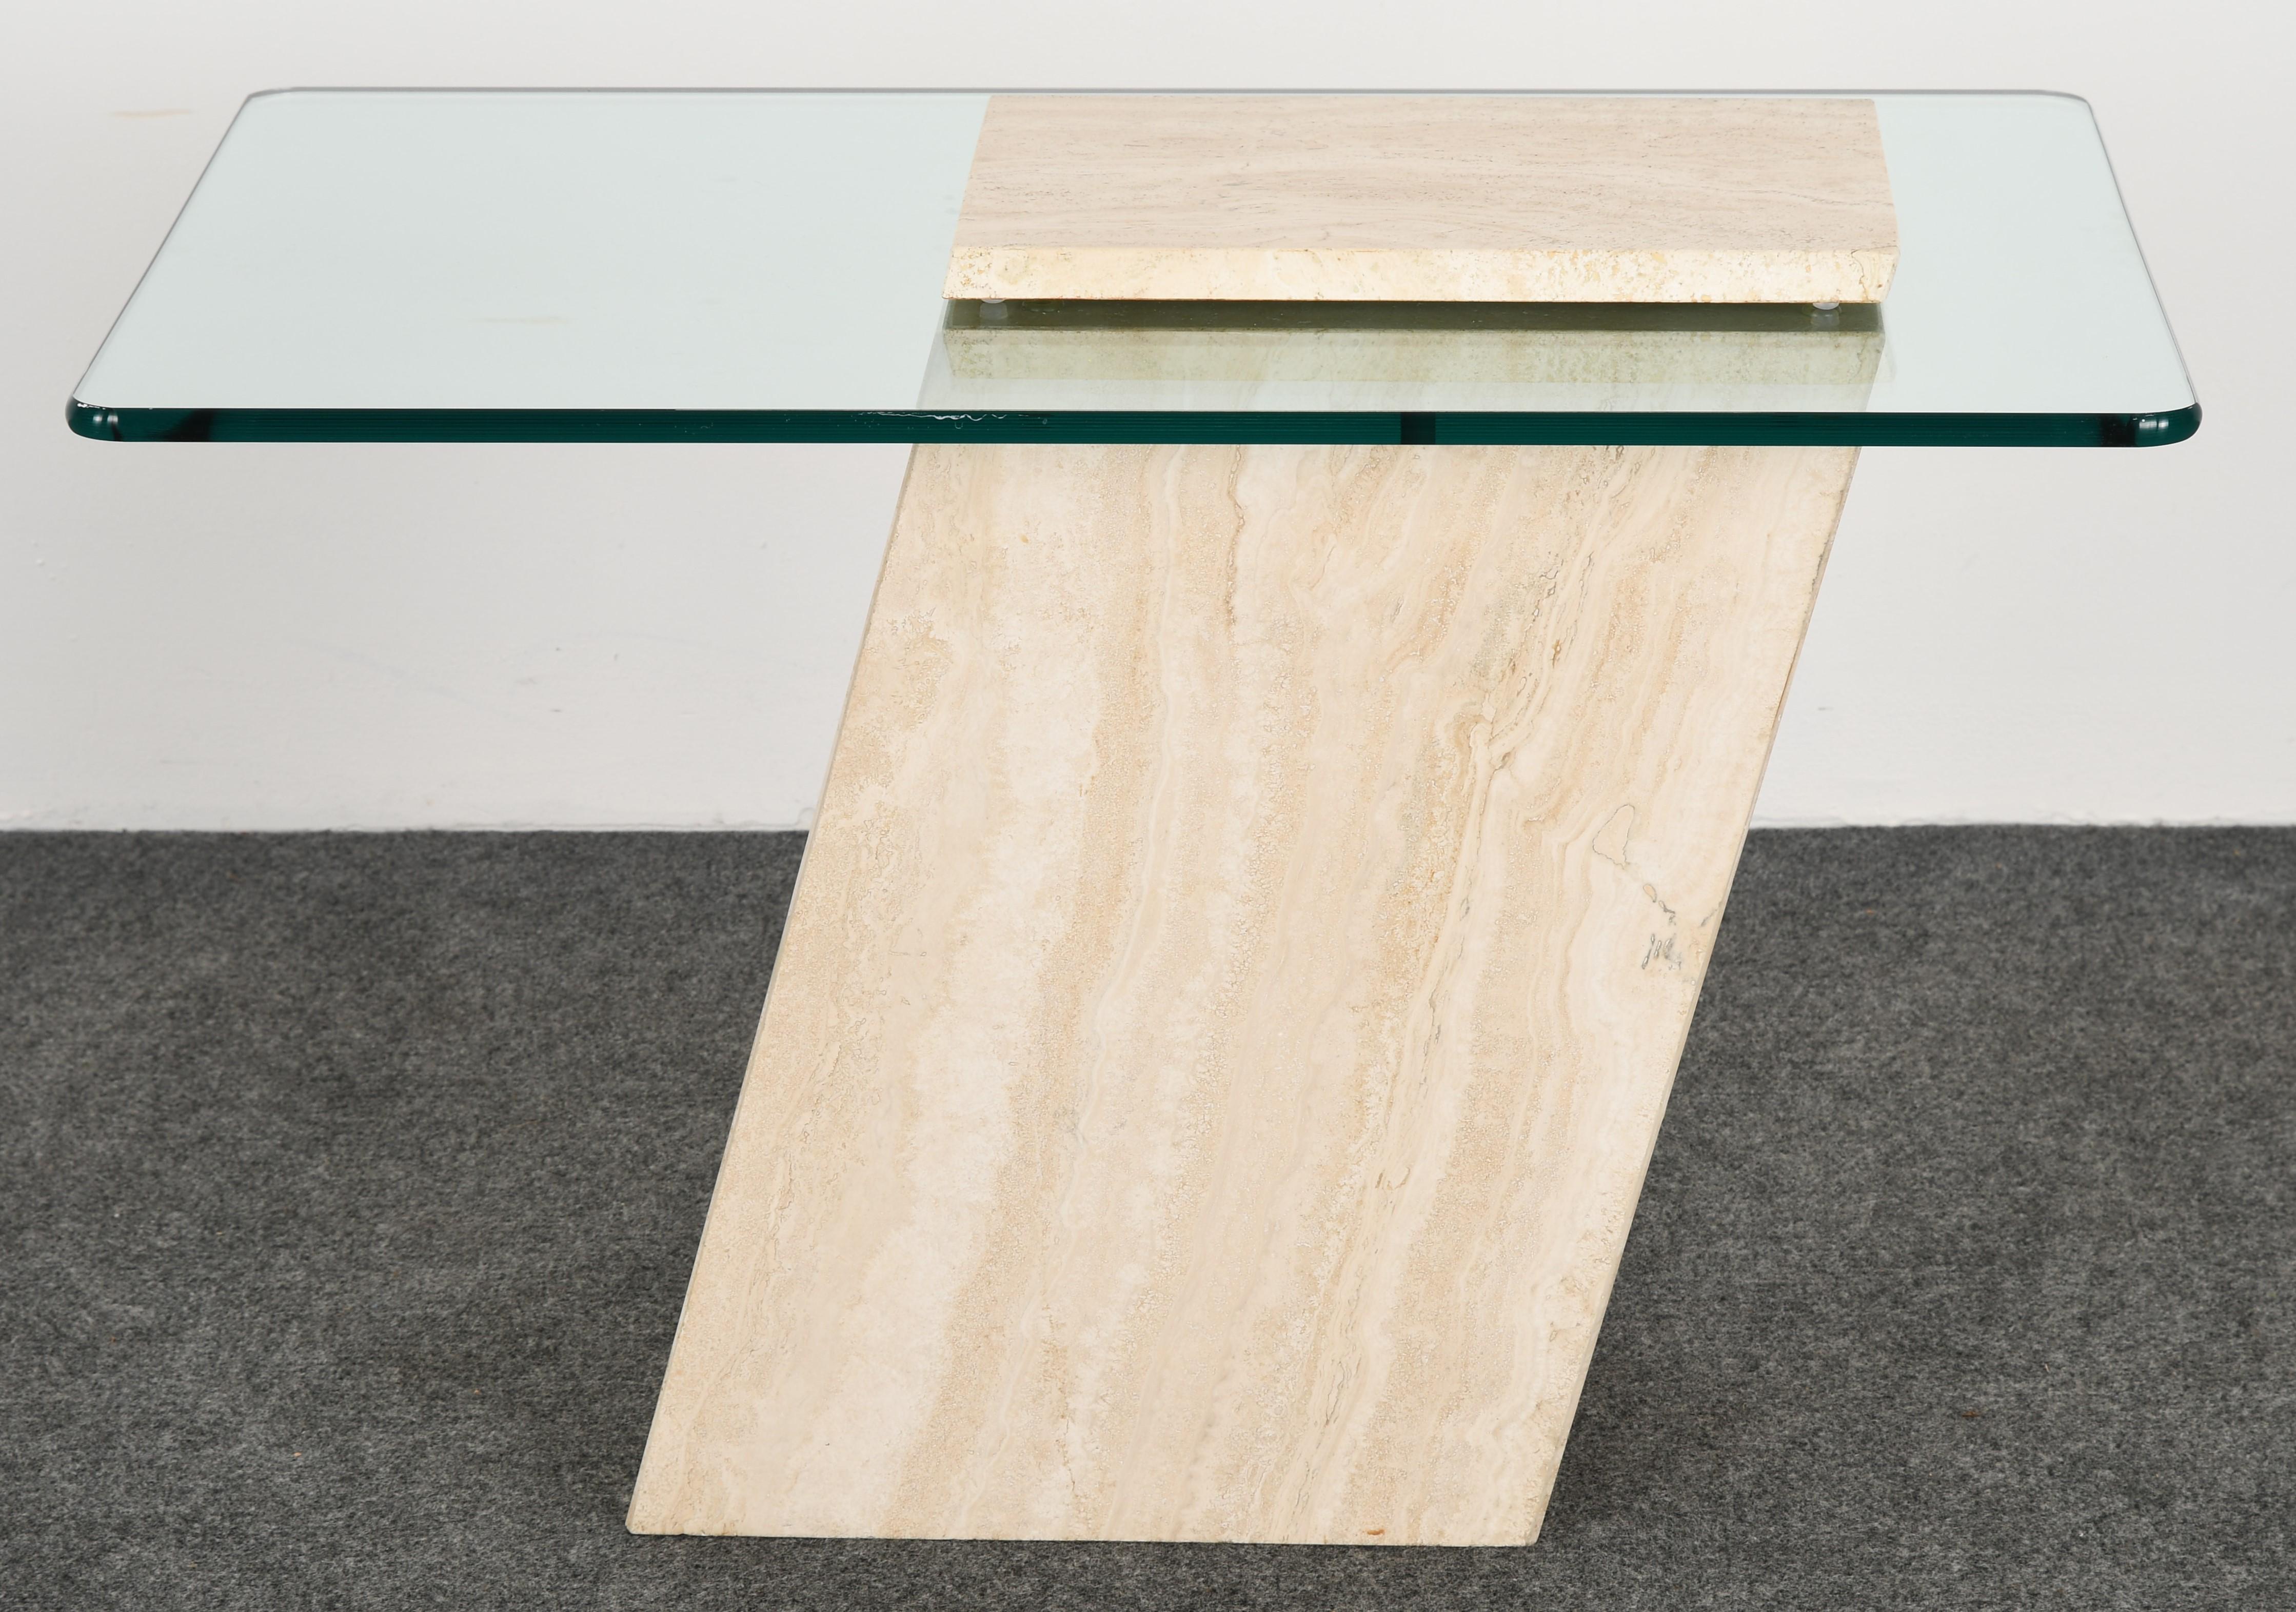 A modernist cantilever travertine side table or occasional table with glass top in the manner of Roche Bobois. This table is structurally sound but has one repair to corner as shown in images. 

Dimensions: 20.5